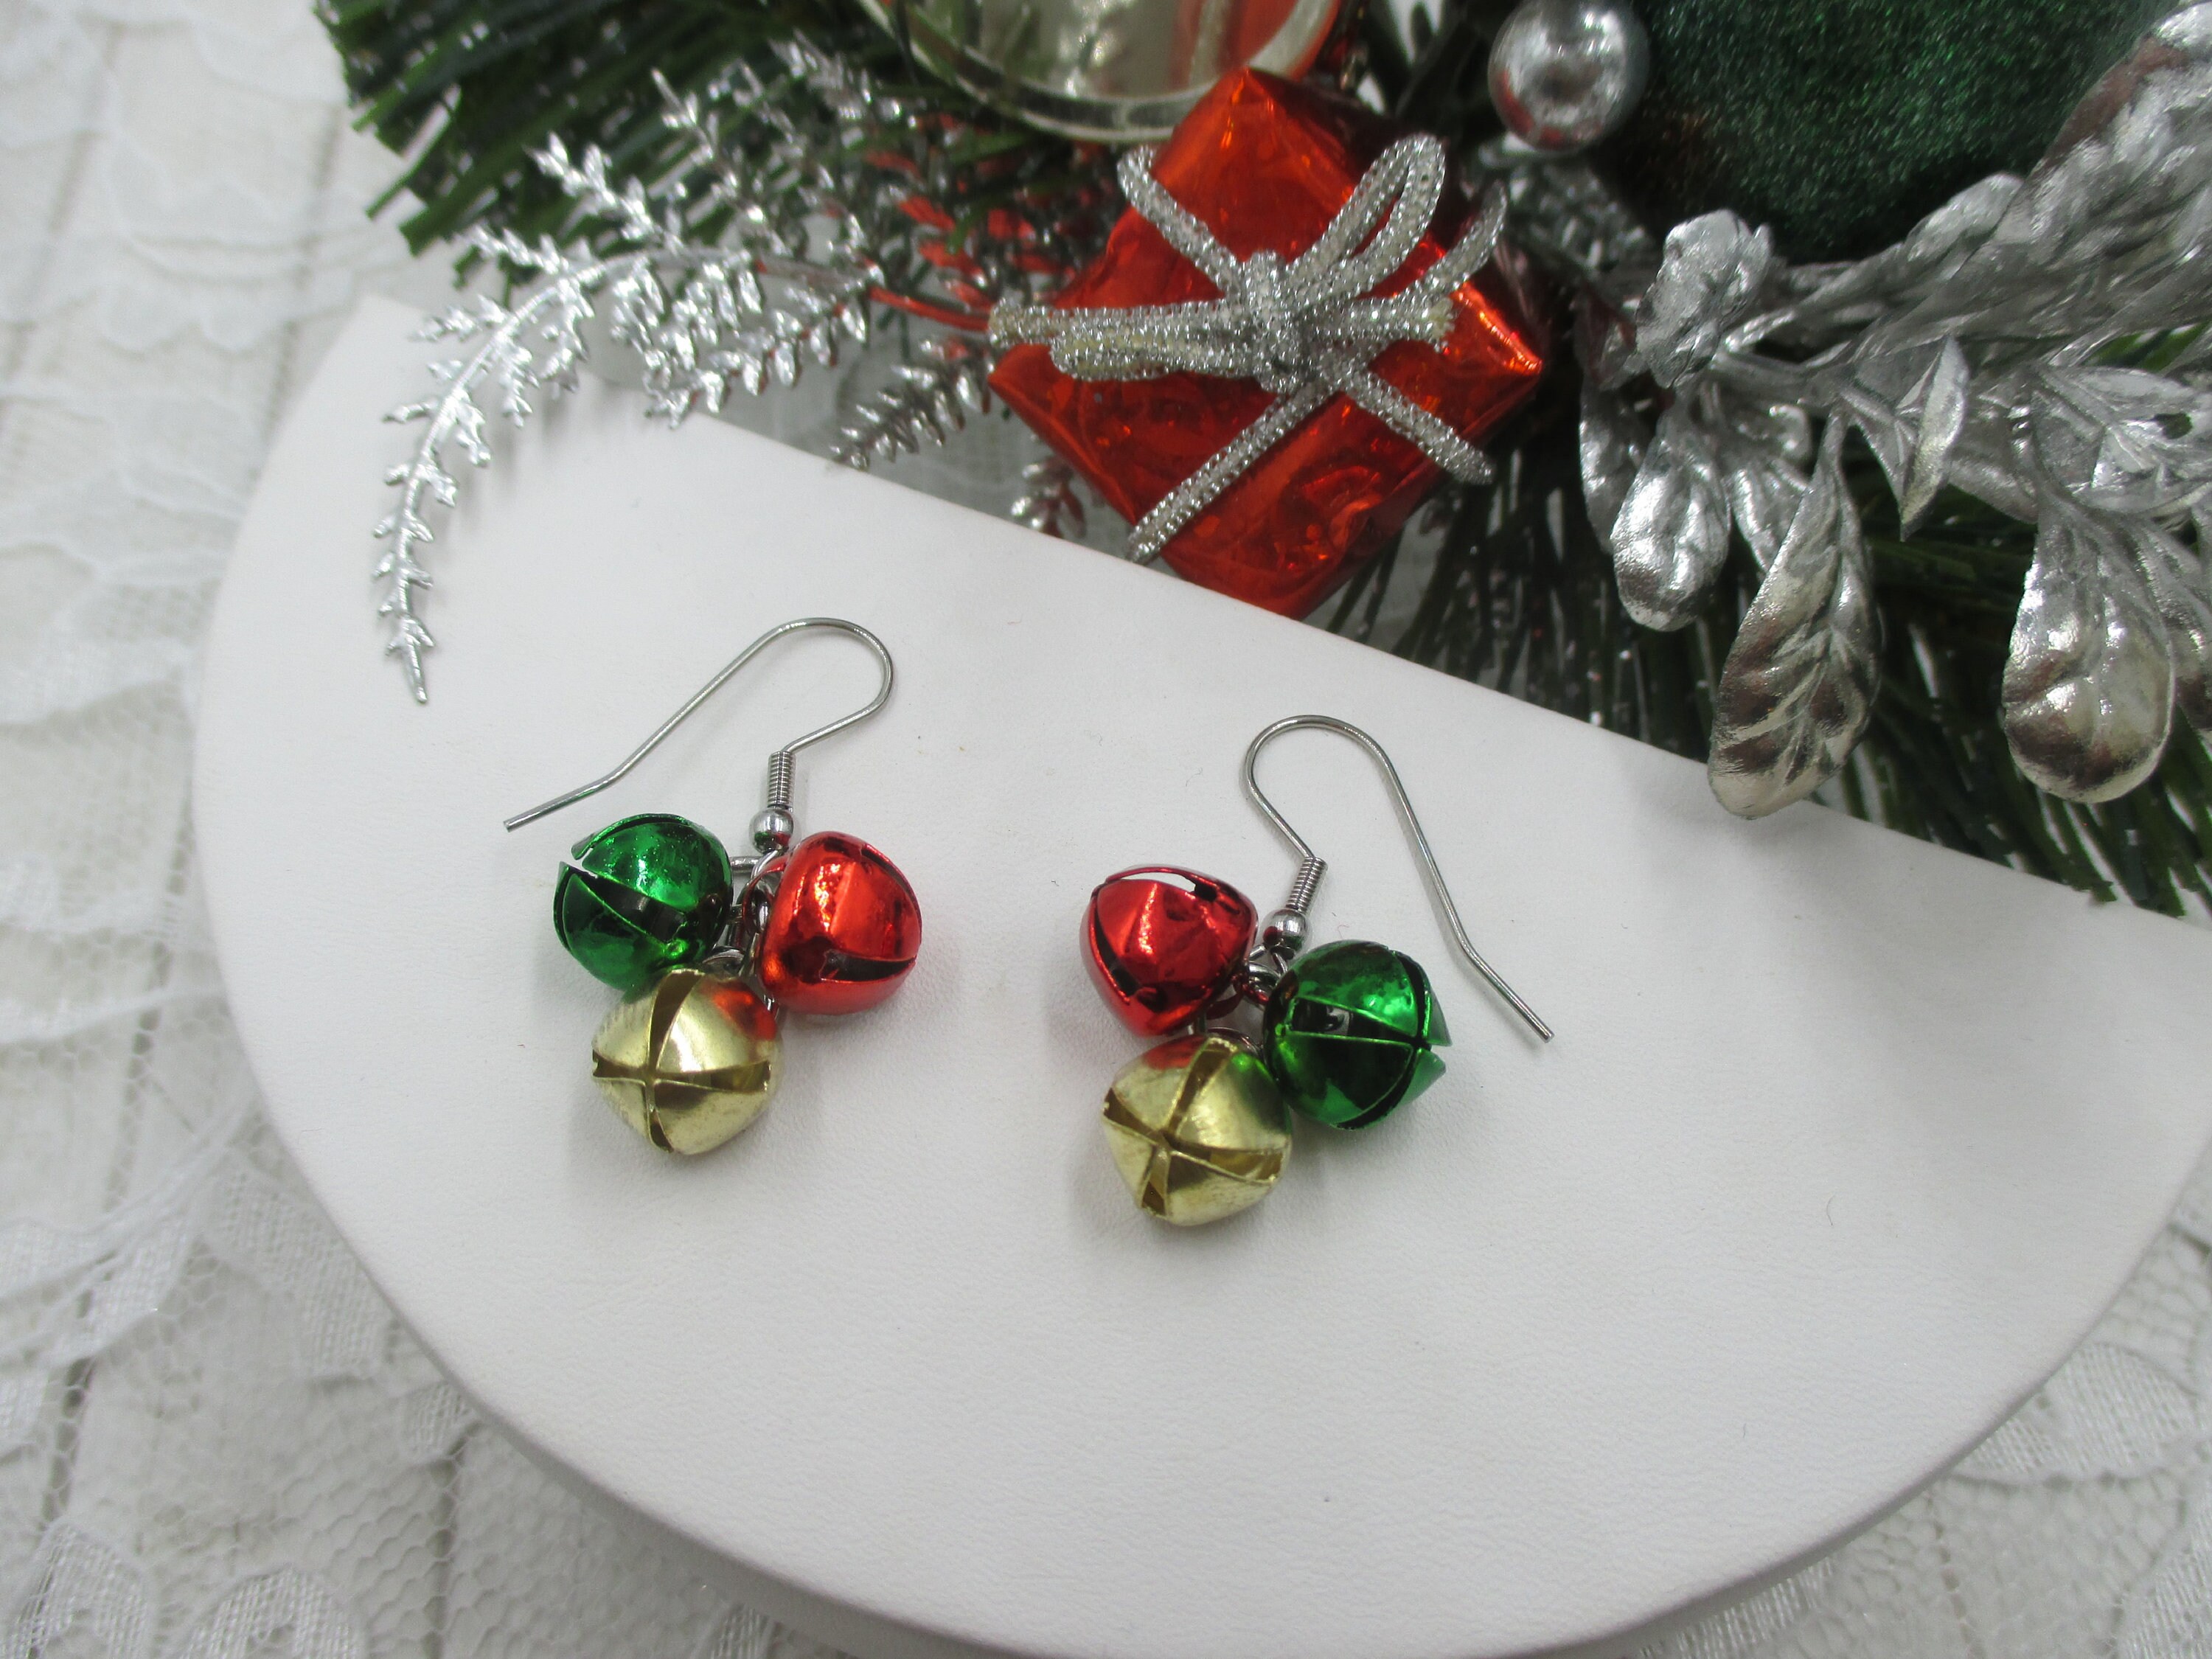 Details about   Christmas Red Green Jingle Bell Bead Dangling Earrings SO CUTE 